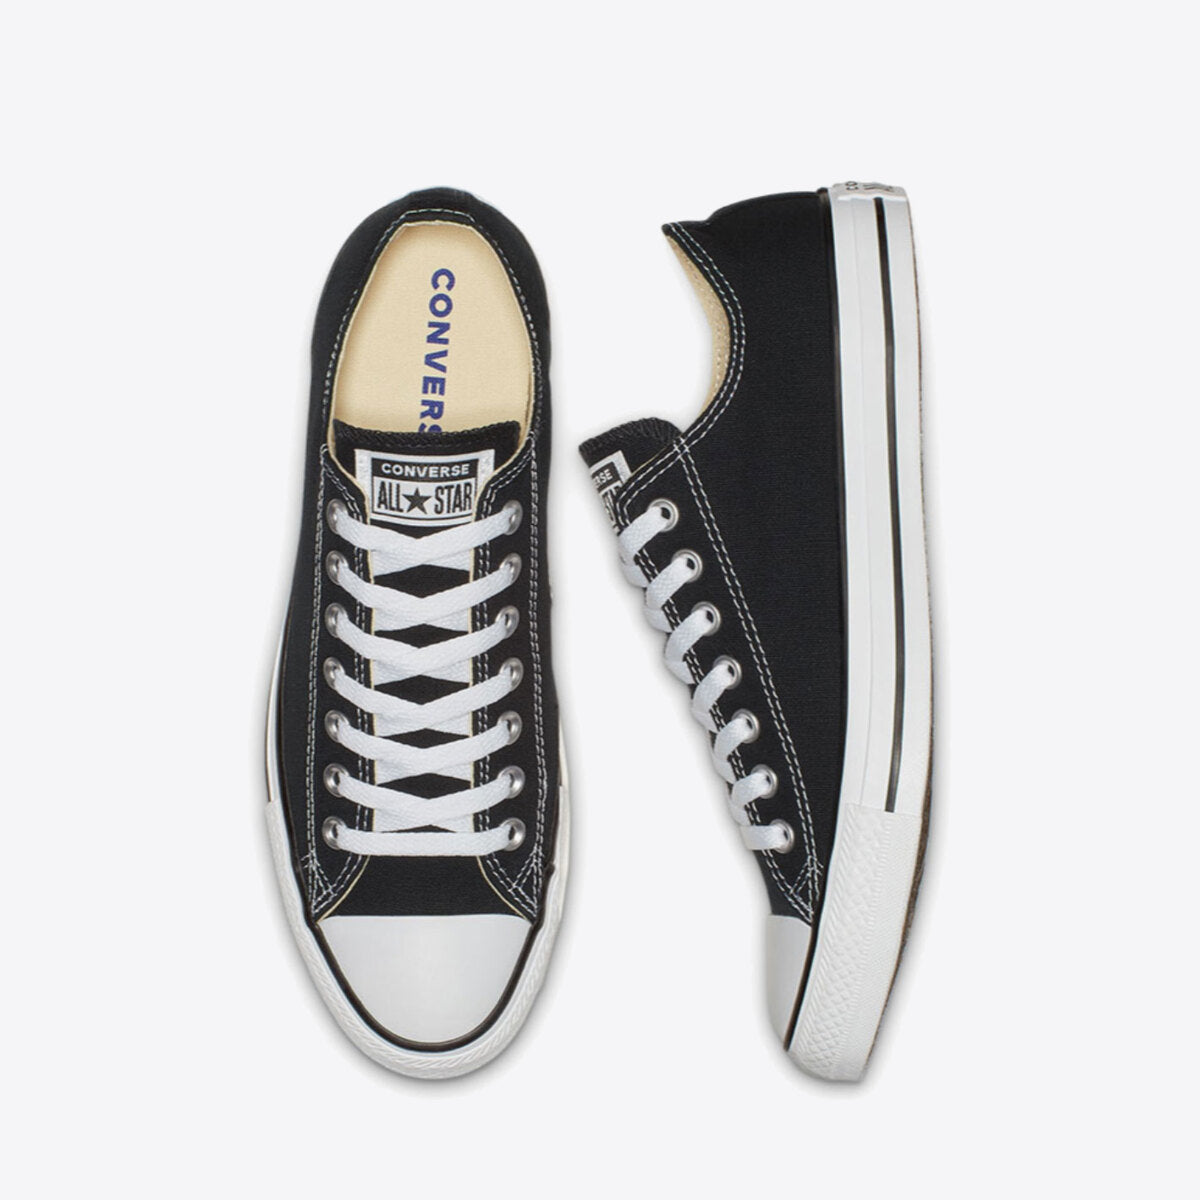 CONVERSE Chuck Taylor All Star Canvas Low Black - Image 0